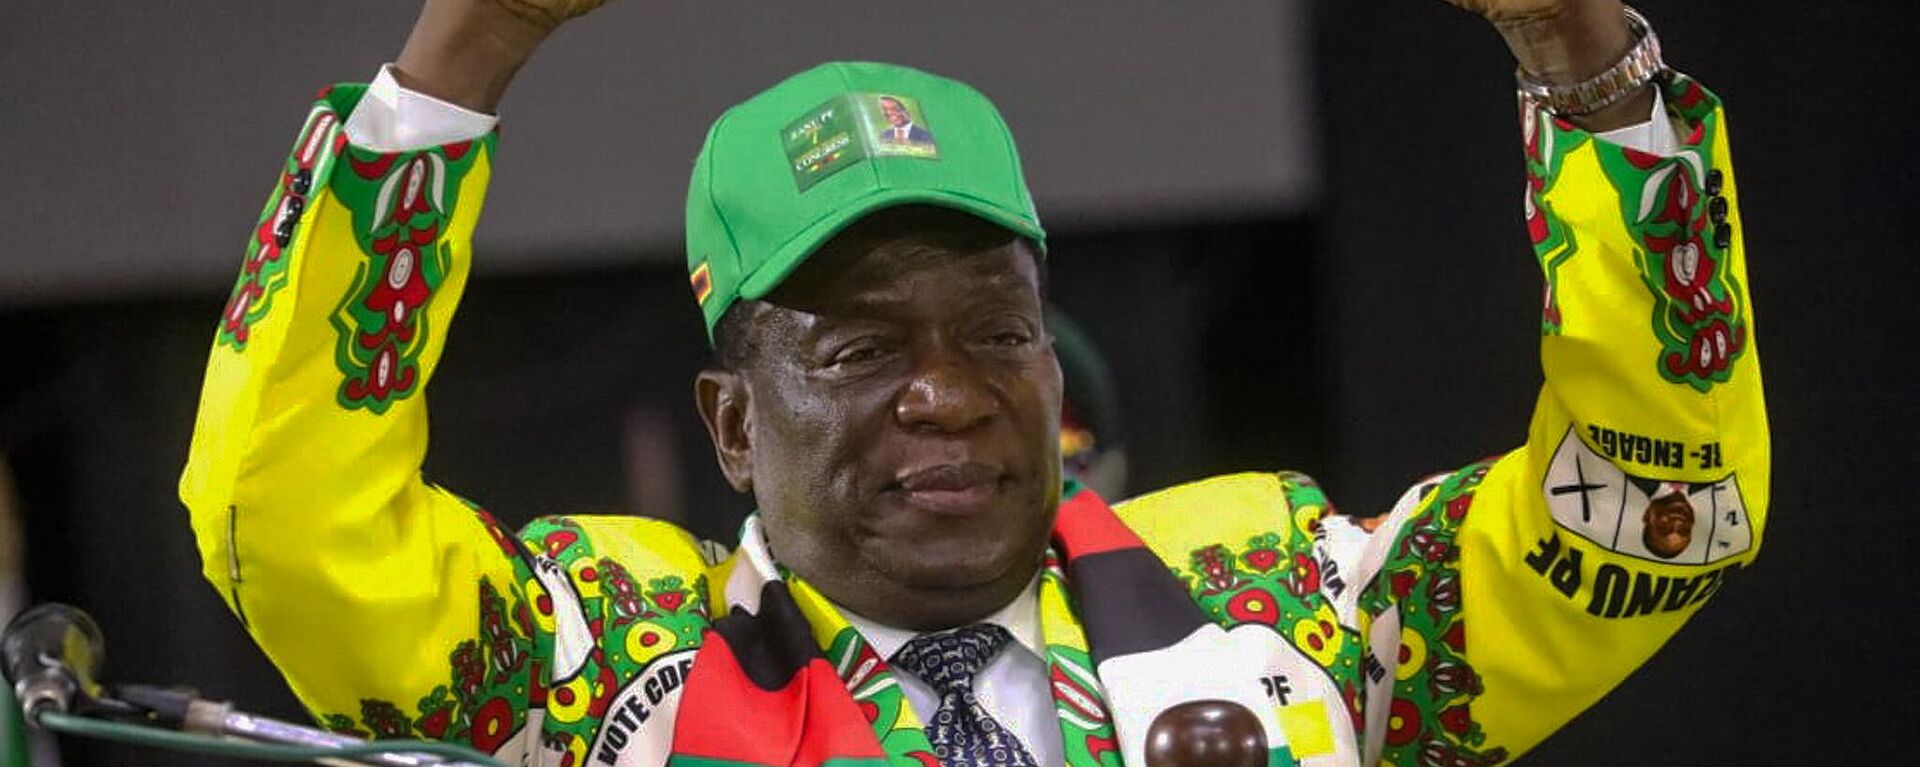 Zimbabwe's President Emmerson Mnangagwa greets delegates at the party congress in Harare, Friday, Oct, 28, 2022. Mnangagwa officially opened a ruling party congress that is set to renominate him as the party's presidential candidate for next year's election.  - Sputnik International, 1920, 26.01.2023